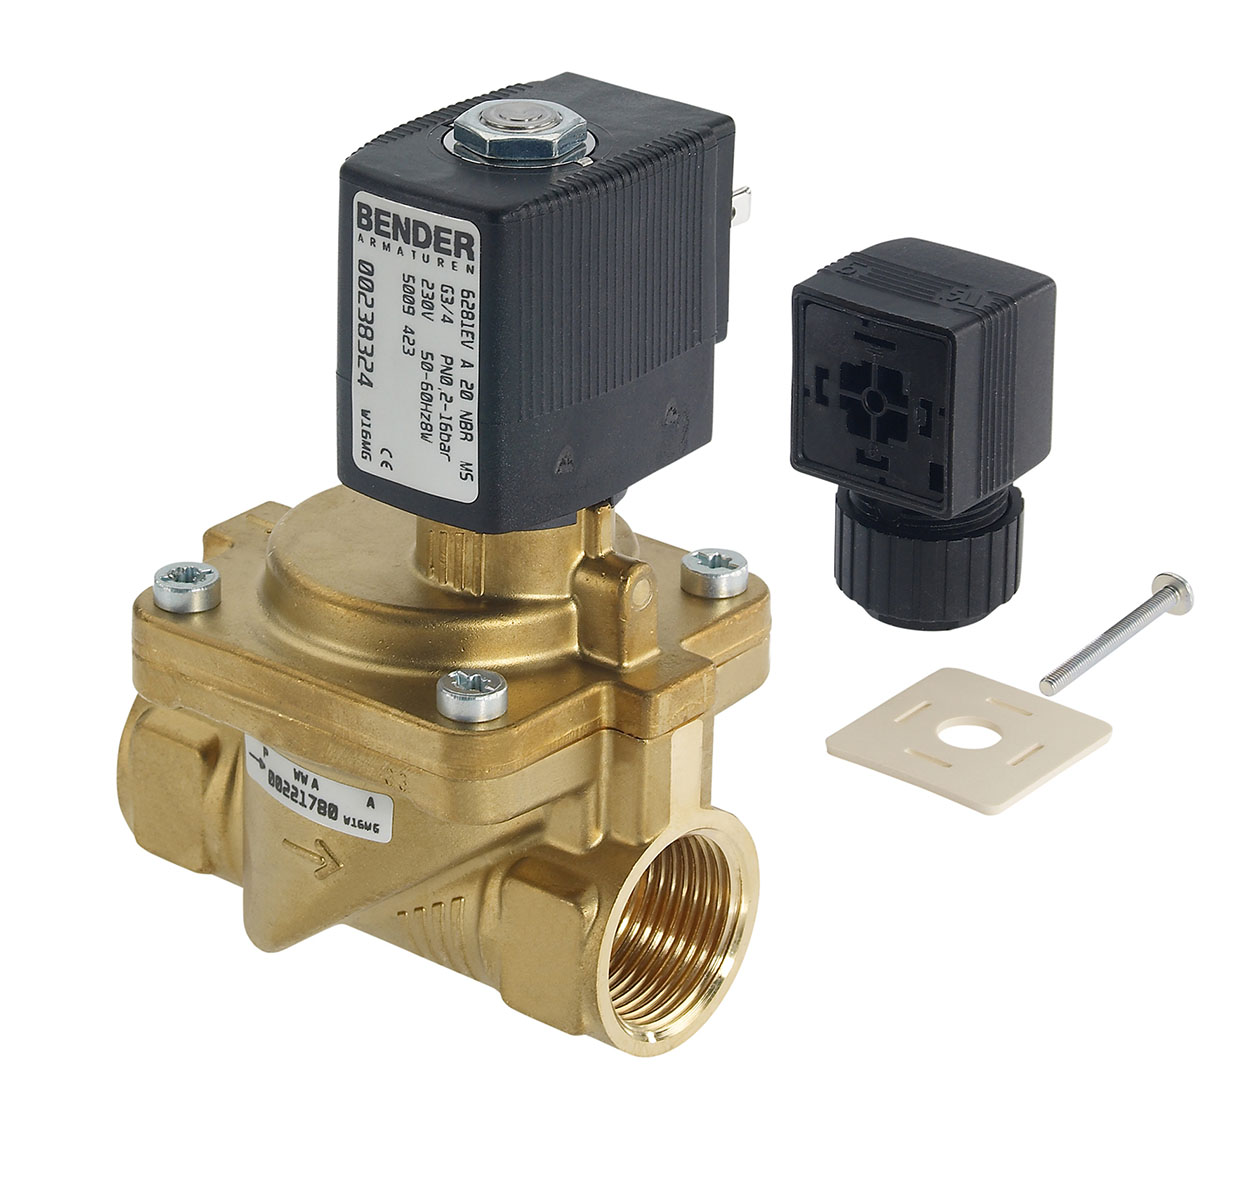 5009433 - 2/2 way solenoid valve normally closed for fluids and compressed air Type 3; female thread